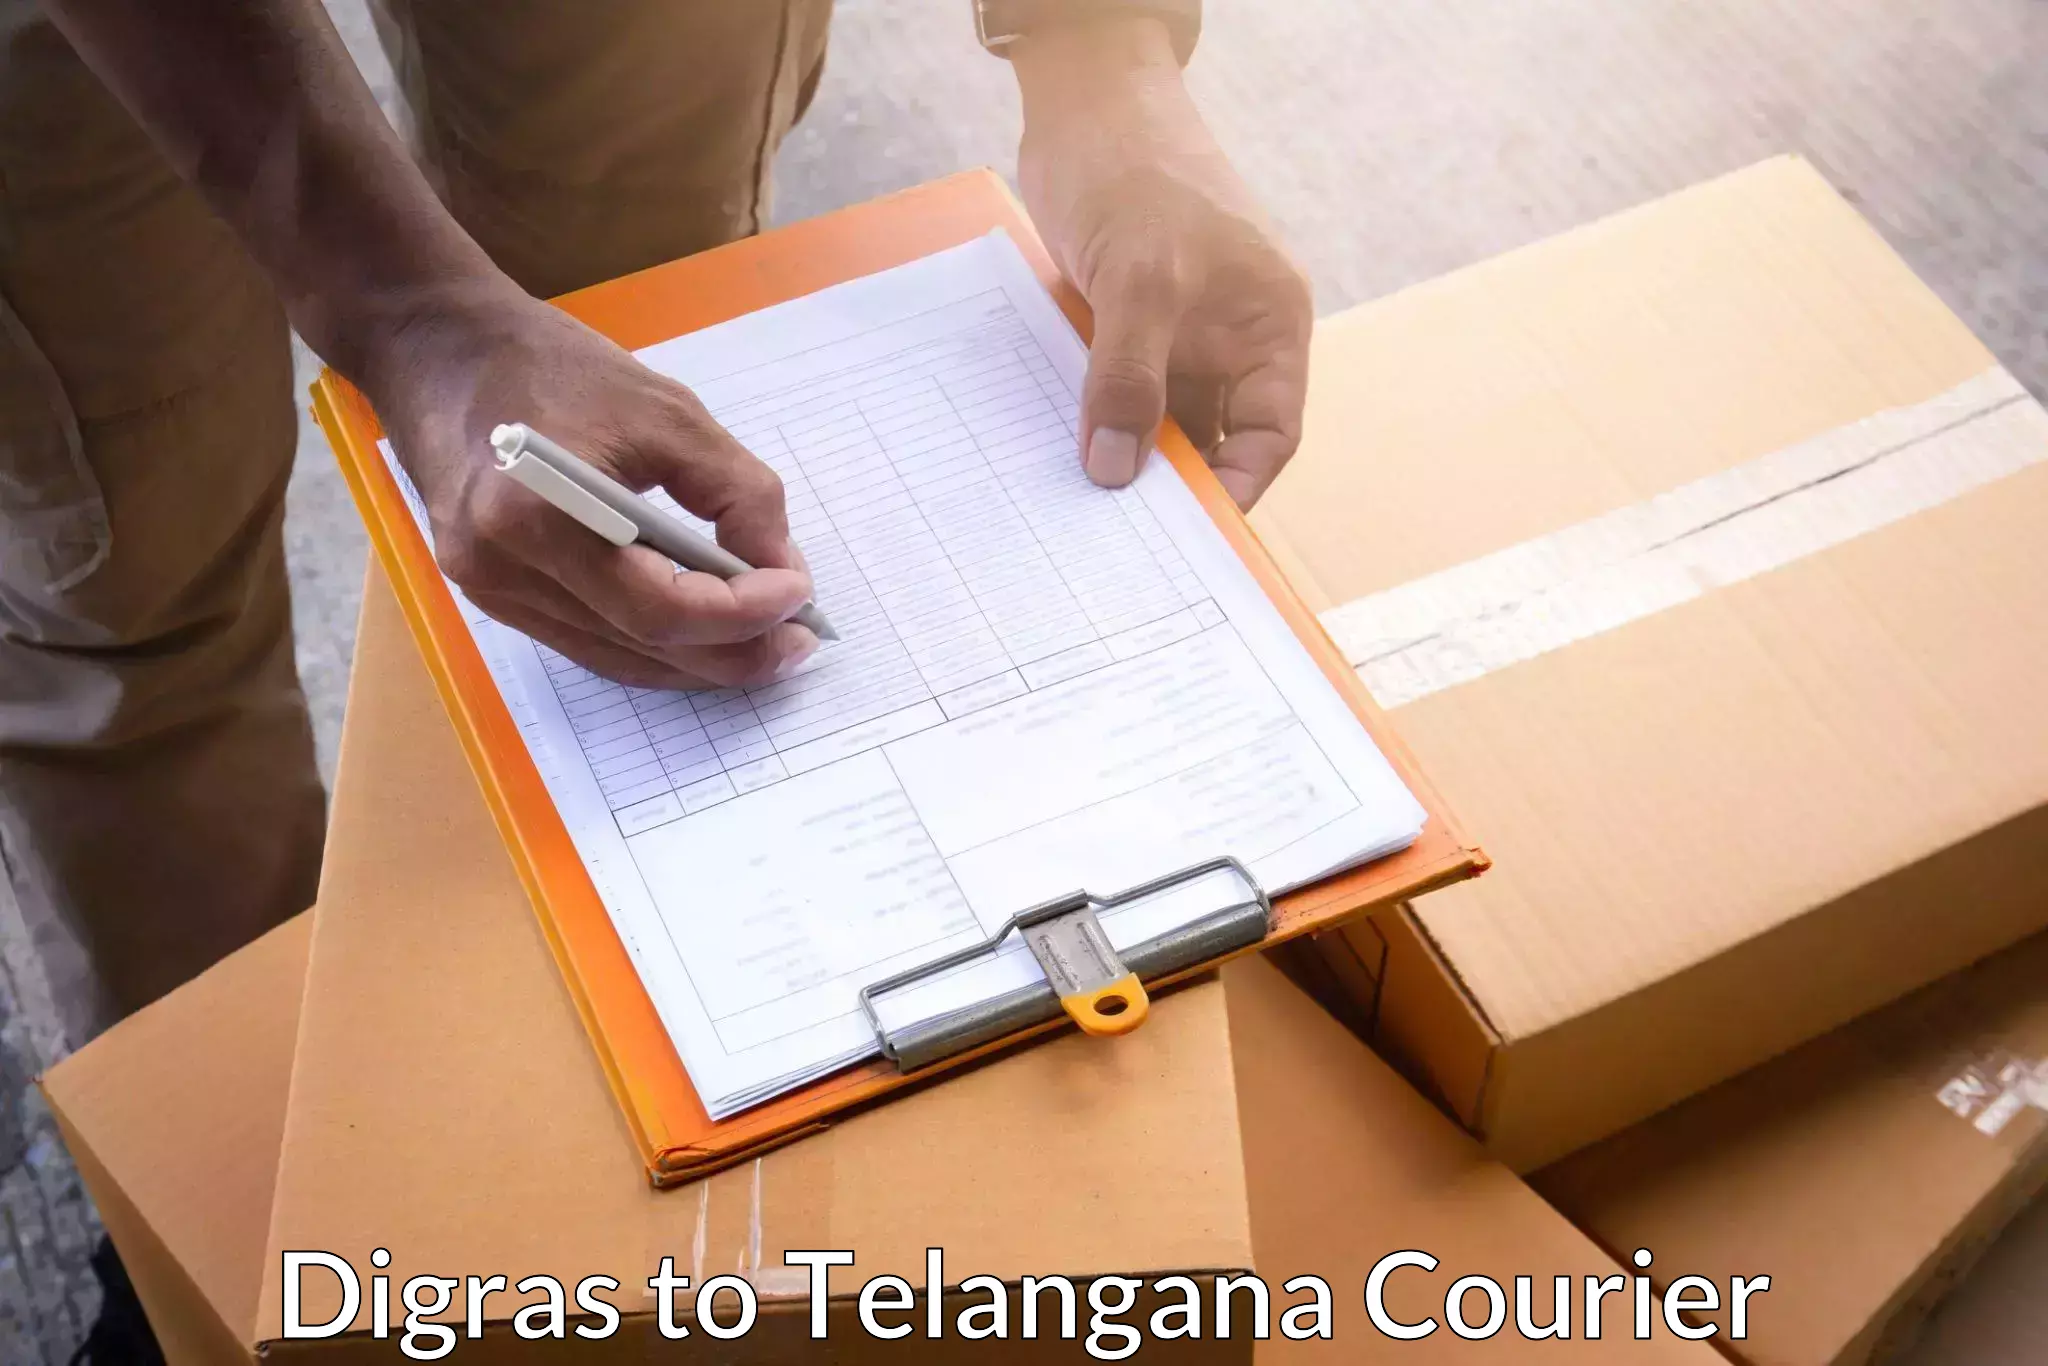 Overnight delivery services Digras to Telangana